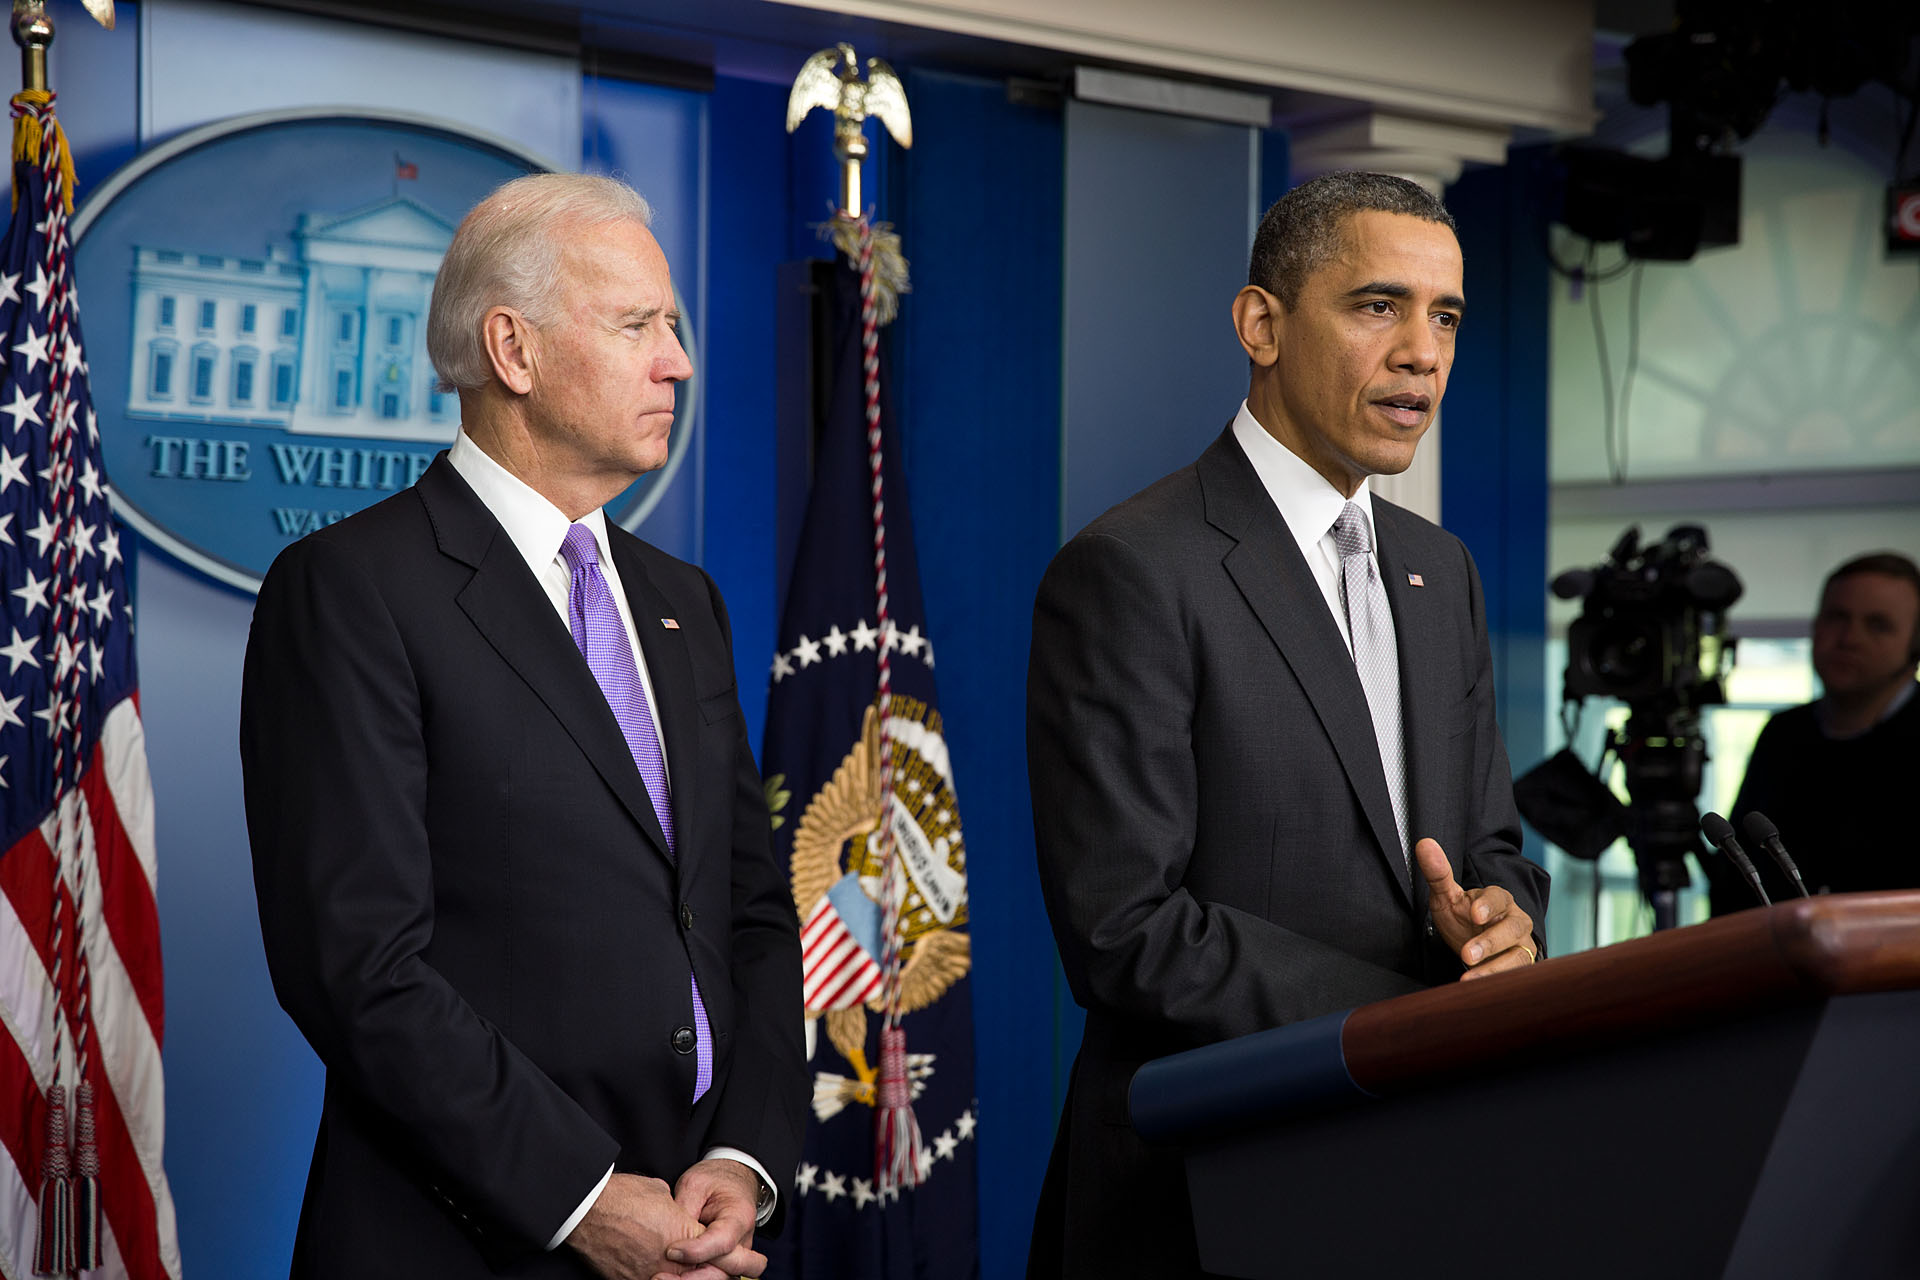 President Obama, with Vice President Biden, delivers a statement about the Administration’s gun policy process, Dec. 19, 2012.  